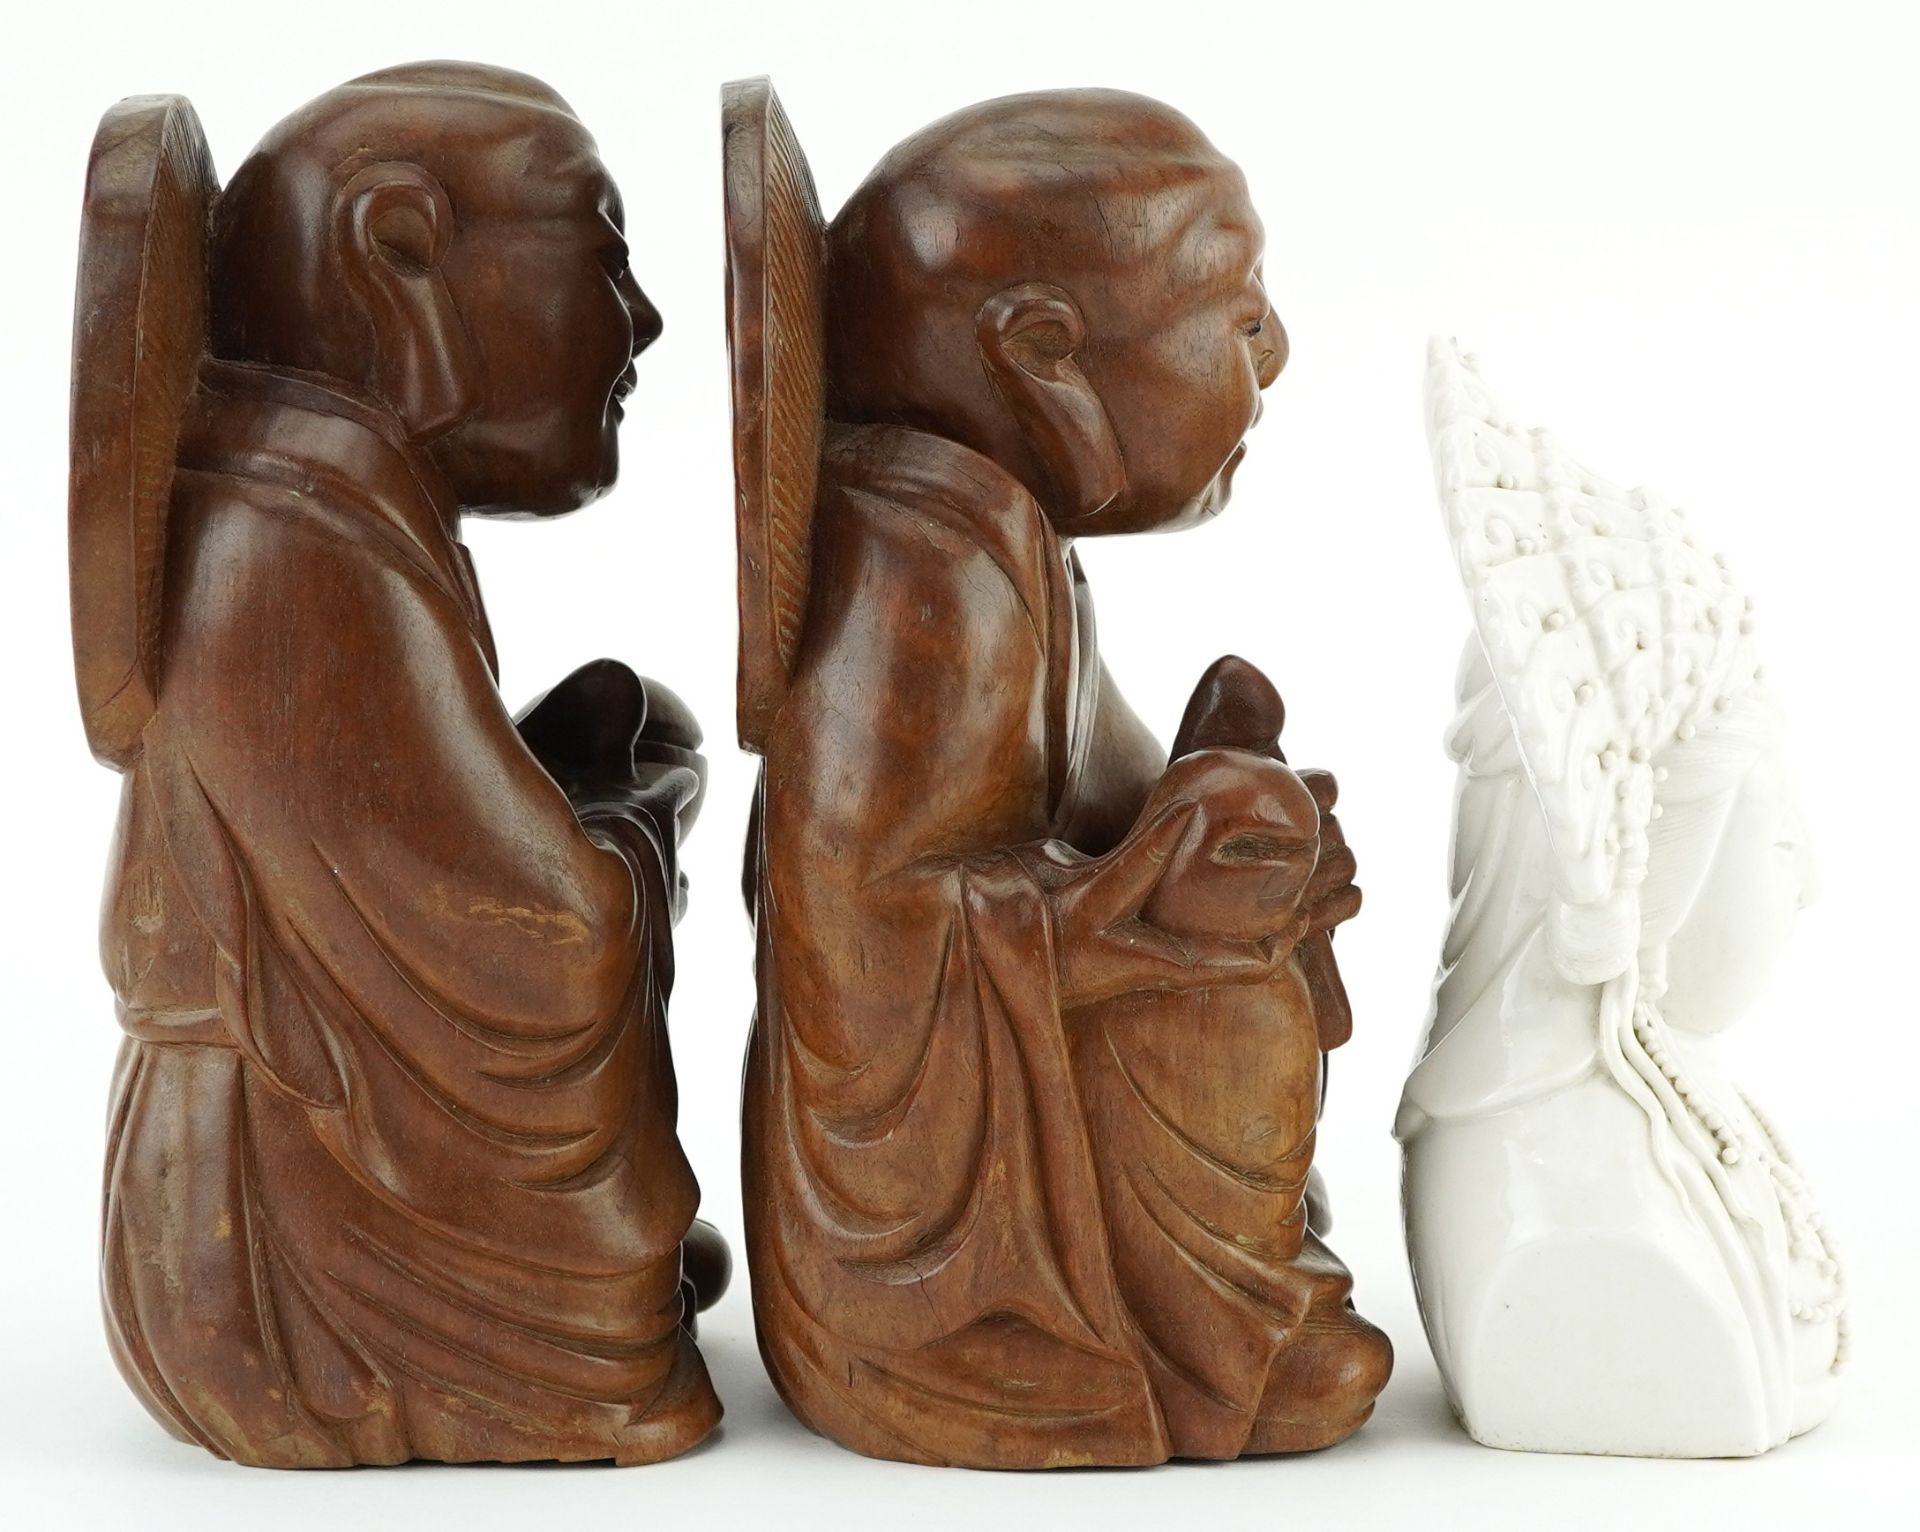 Pair of Chinese hardwood carvings of Buddha and blanc de chine glazed porcelain bust of Guanyin, the - Image 4 of 7